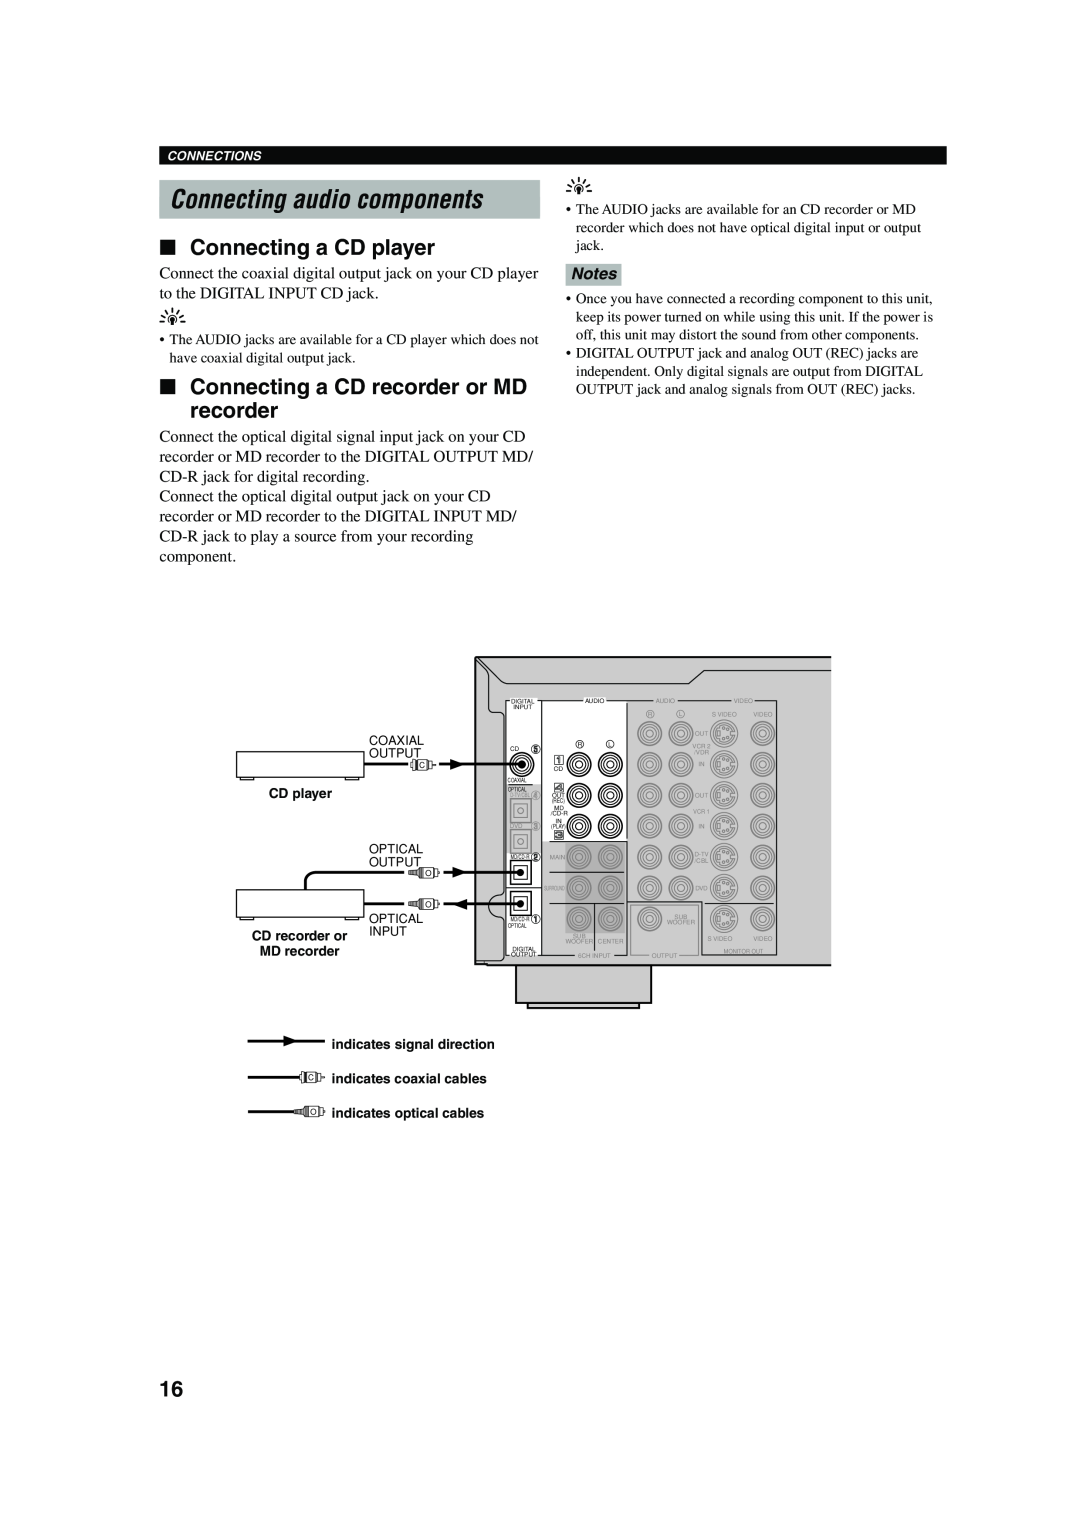 Yamaha HTR-5560 owner manual Connecting audio components, Connecting a CD player, Connecting a CD recorder or MD recorder 